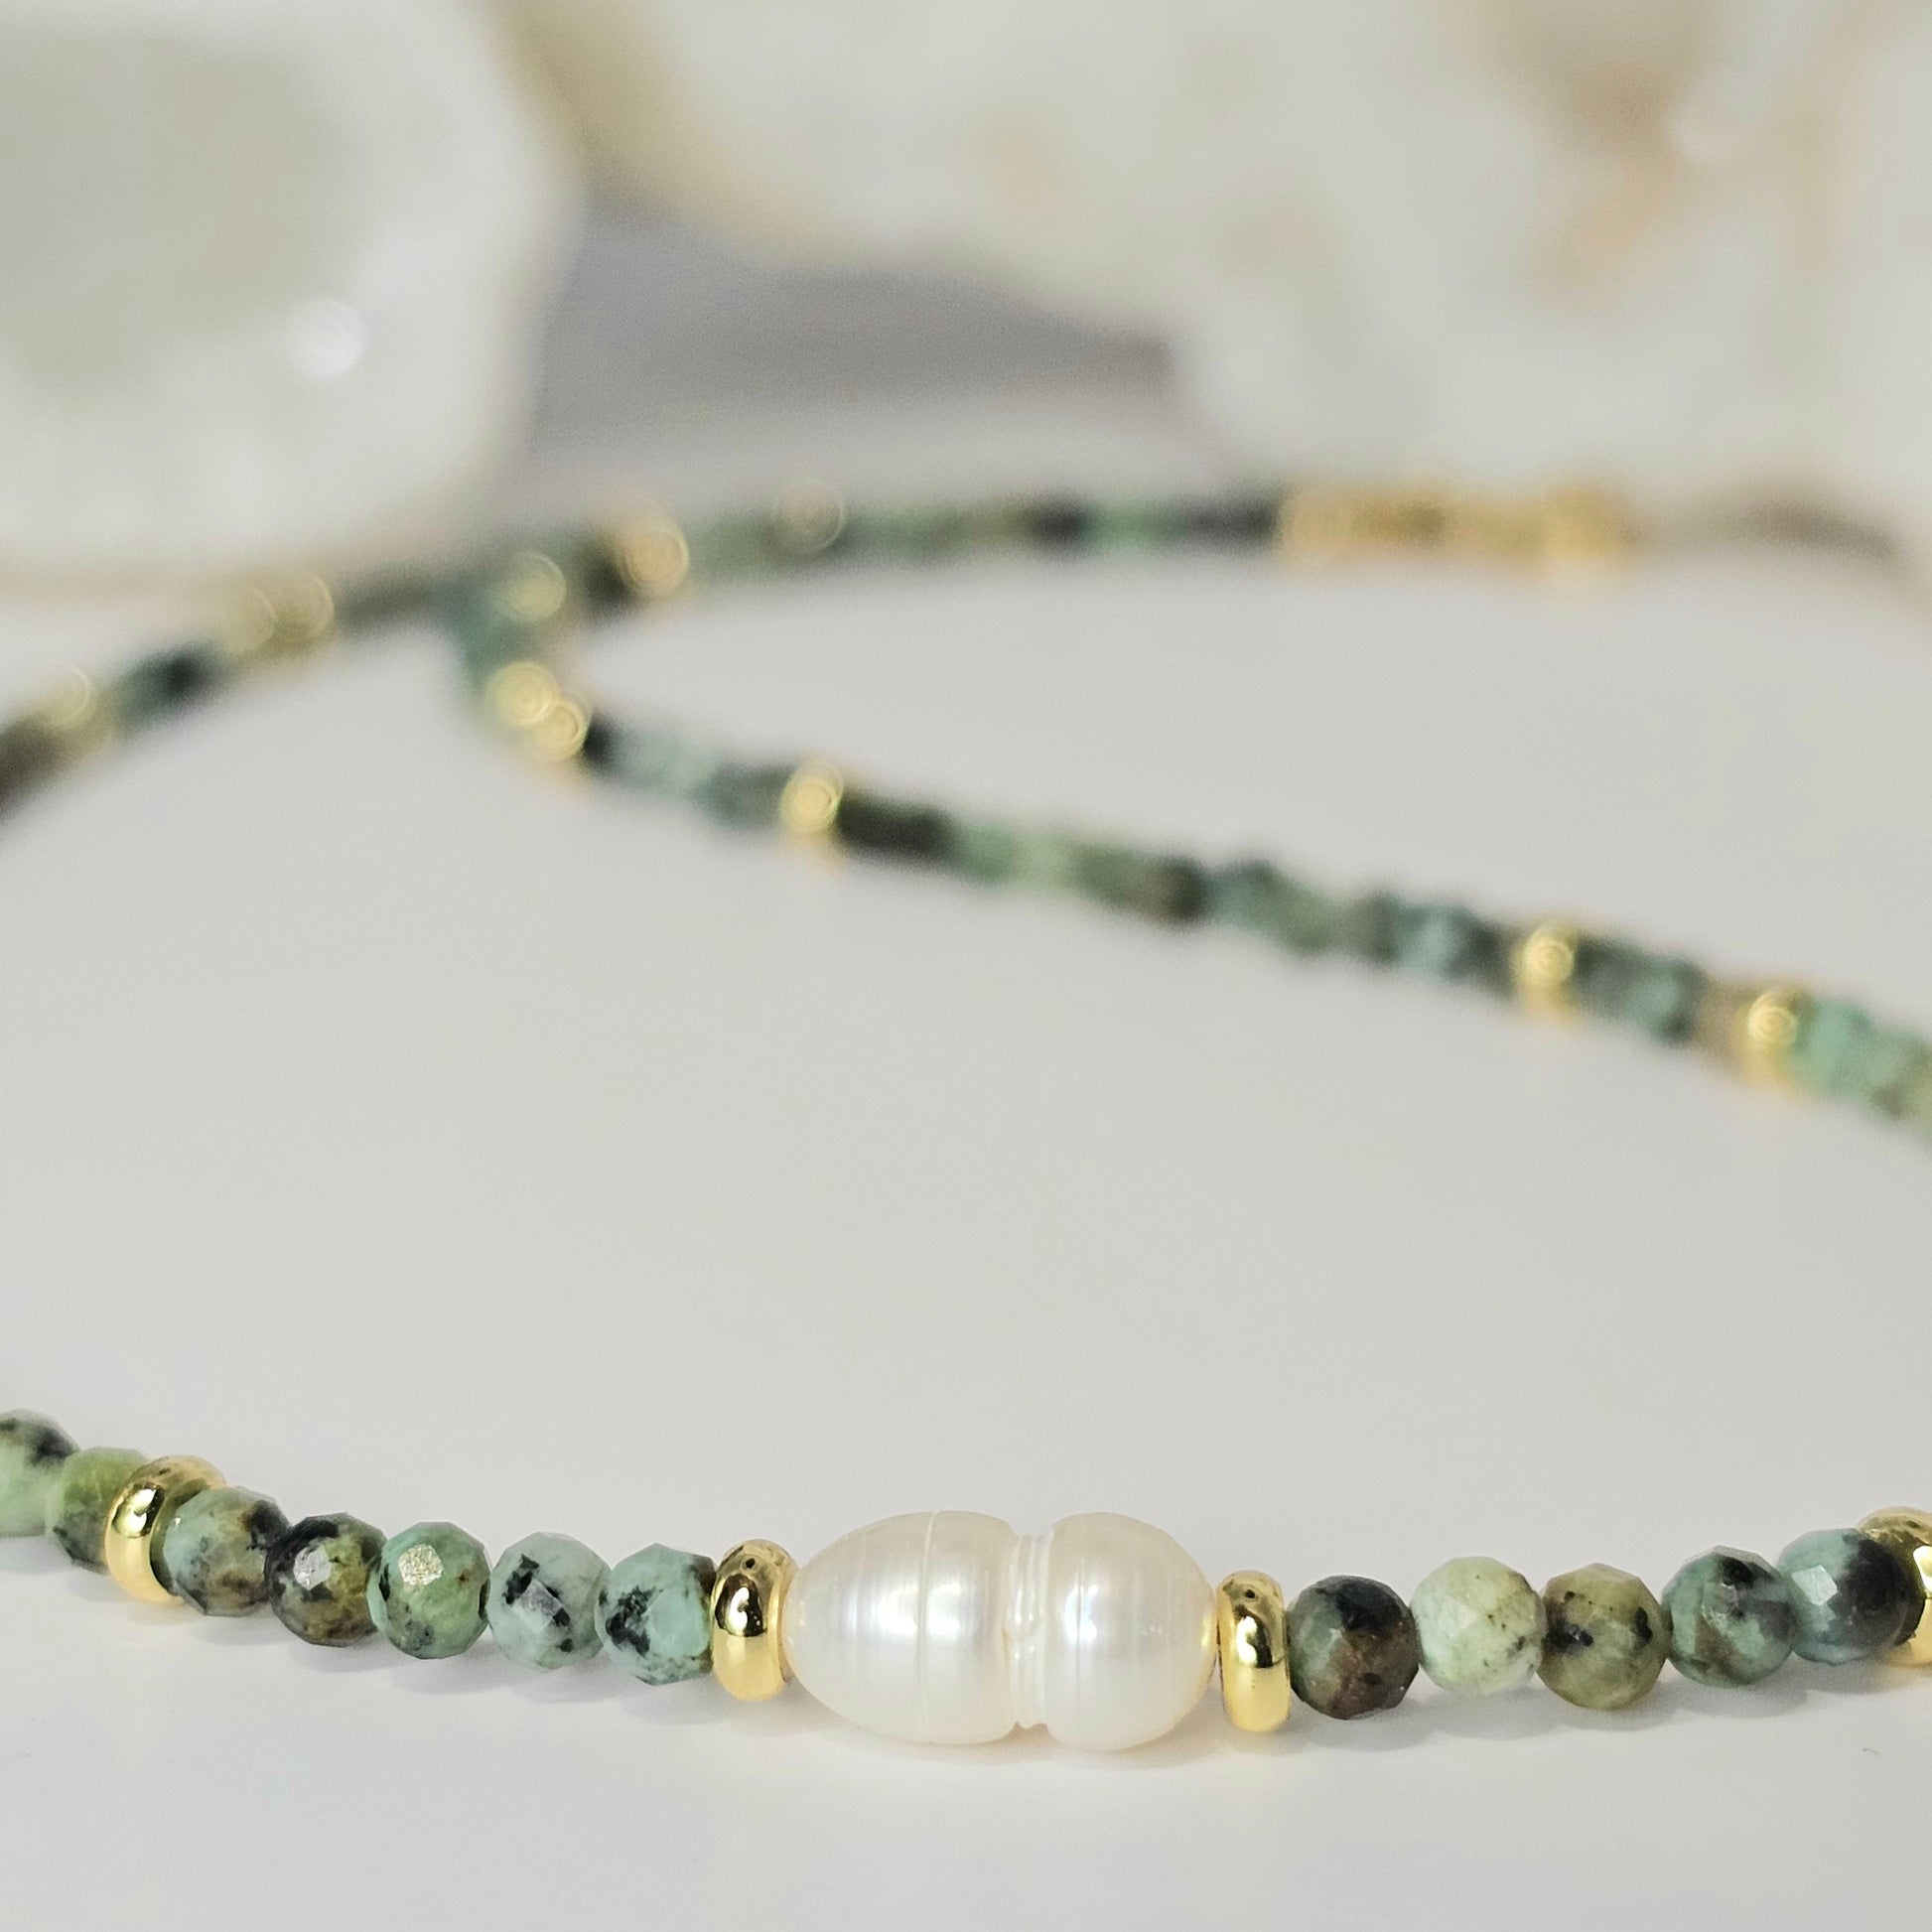 Delicate, faceted African Turquoise bead necklace with focal 8mm Freshwater Pearl and gold toned stainless steel clasp.